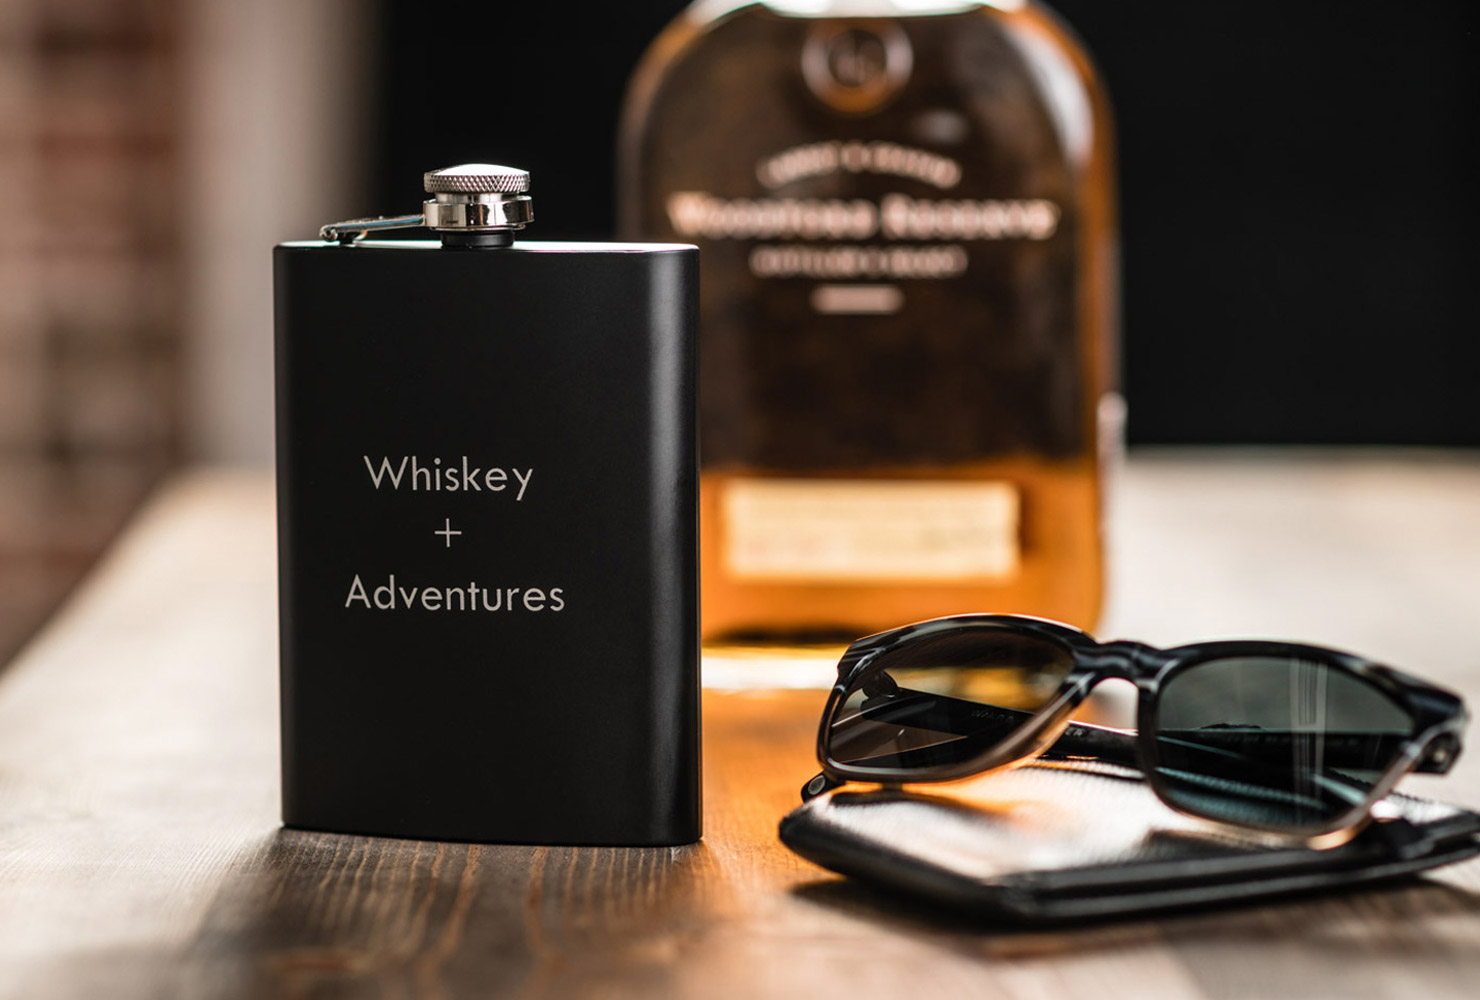 Whiskey and adventures flask.